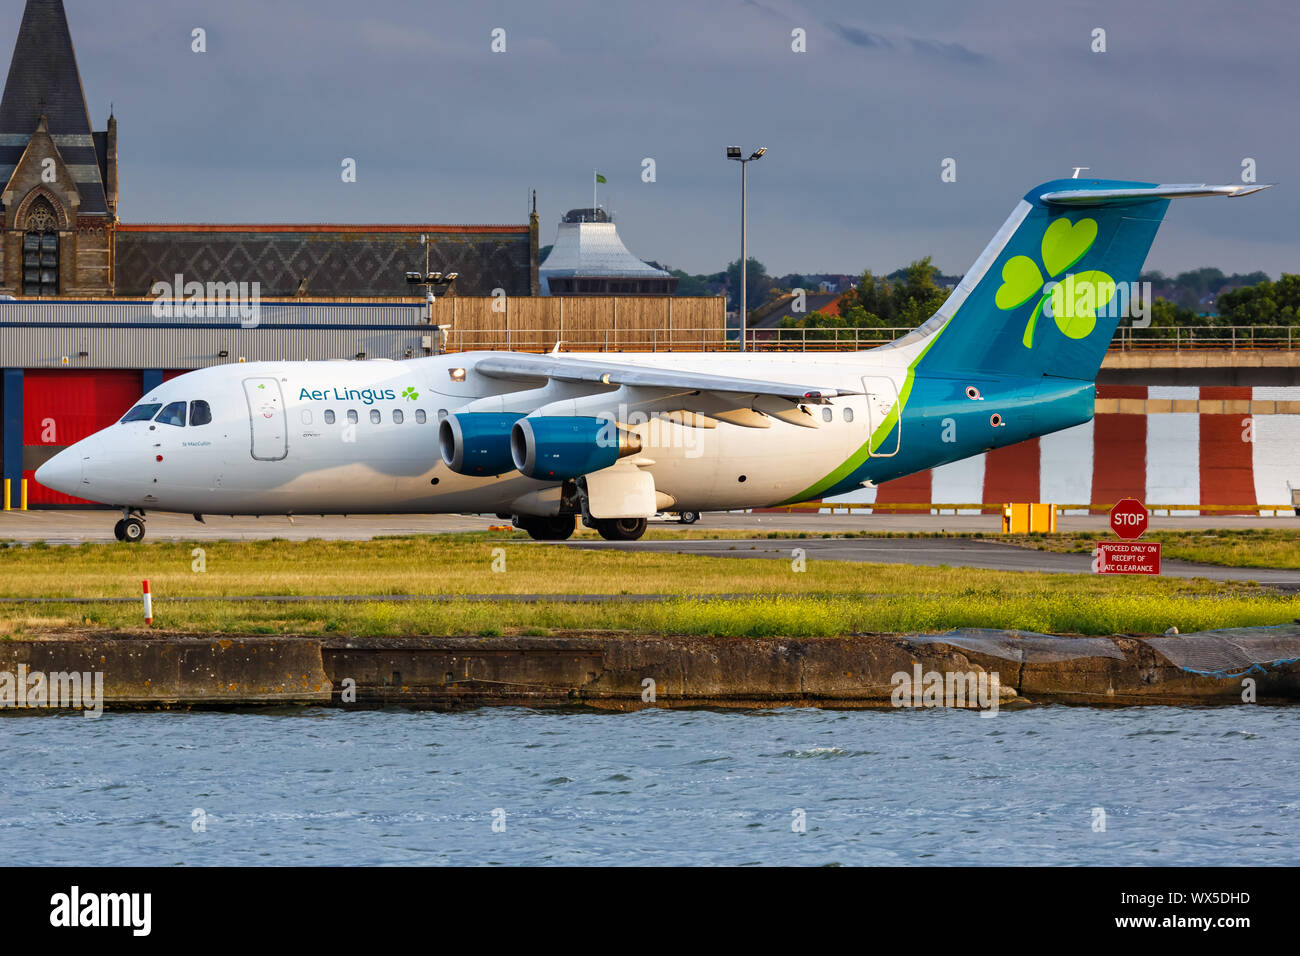 London, United Kingdom – July 7, 2019: Aer Lingus BAE Systems Avro 146 RJ85 airplane at London City Airport (LCY) in the United Kingdom. Stock Photo